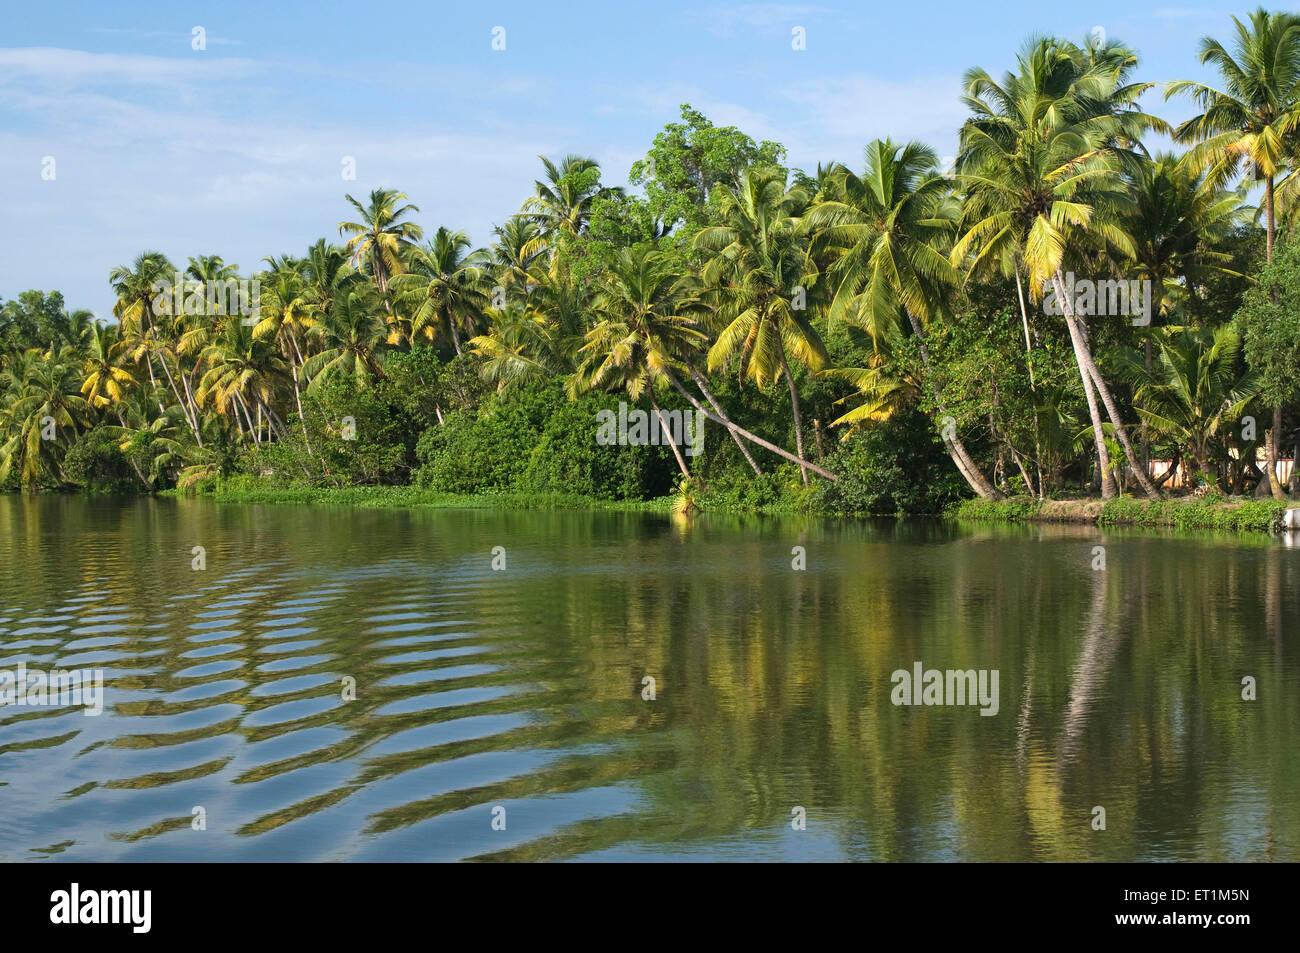 Landscape of backwaters with coconut palm trees on the edge of the water Kochi Kerala India Stock Photo